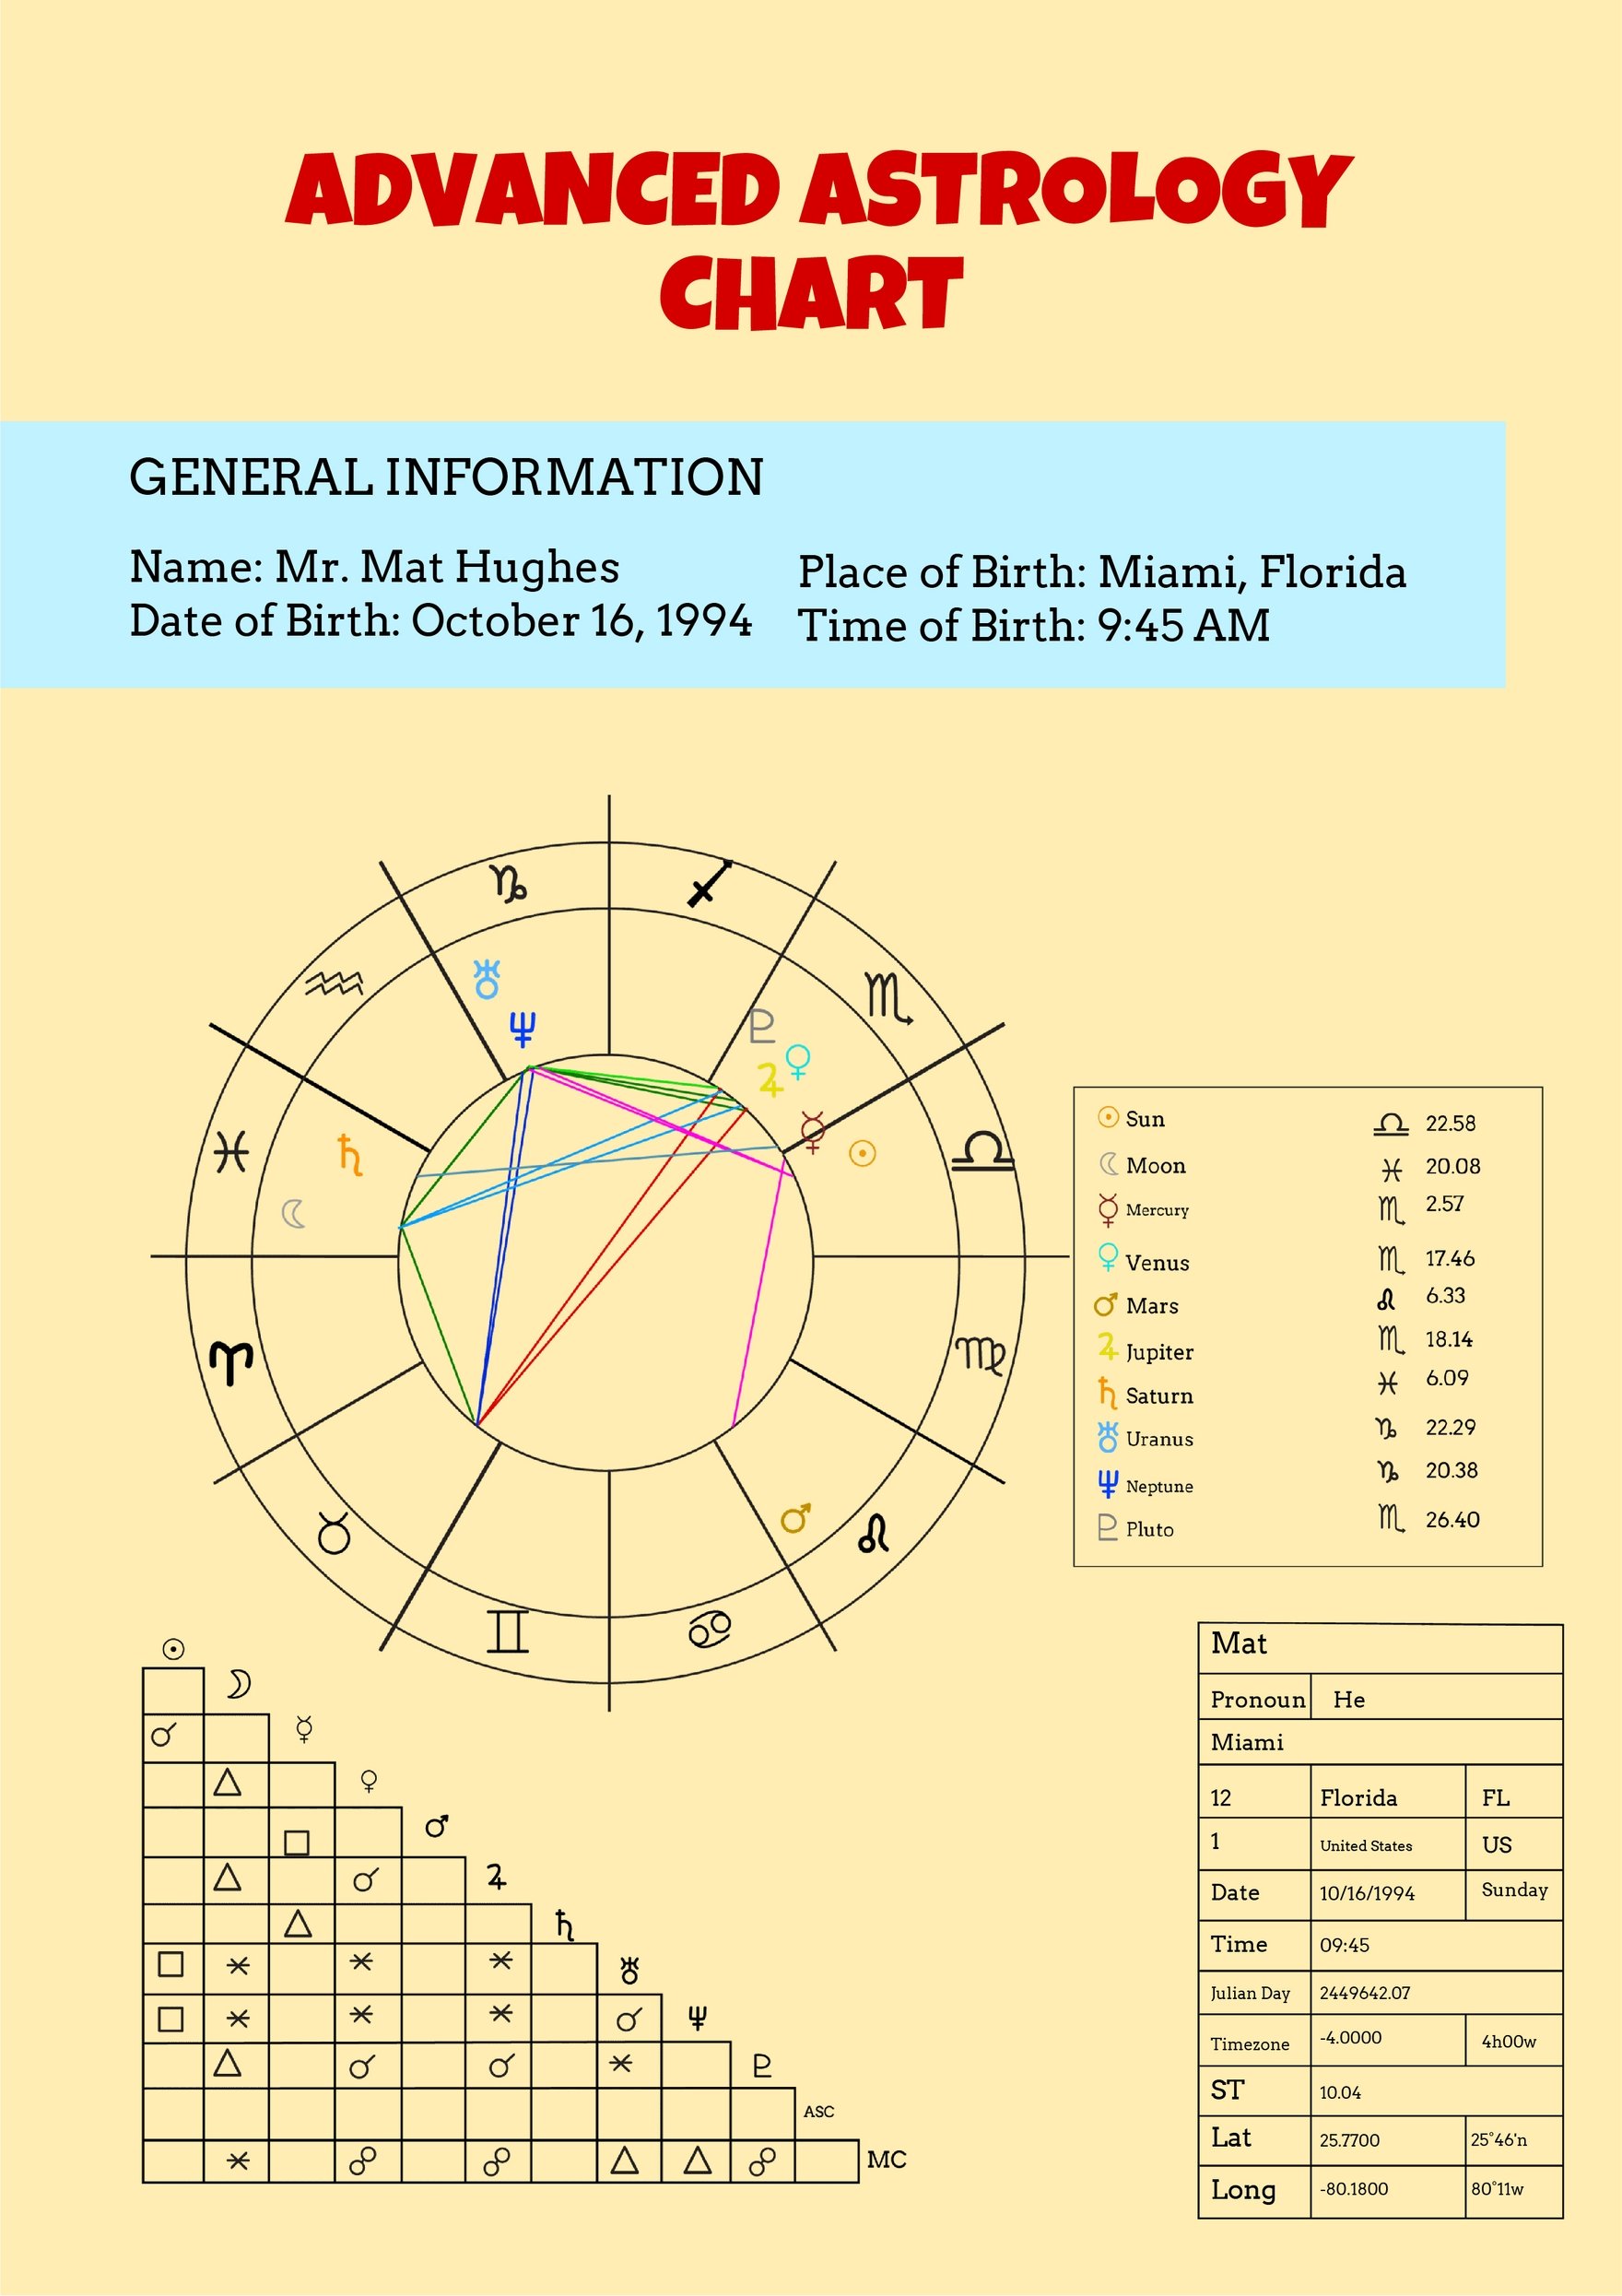 Free Advanced Astrology Chart Template Download in PDF, Illustrator